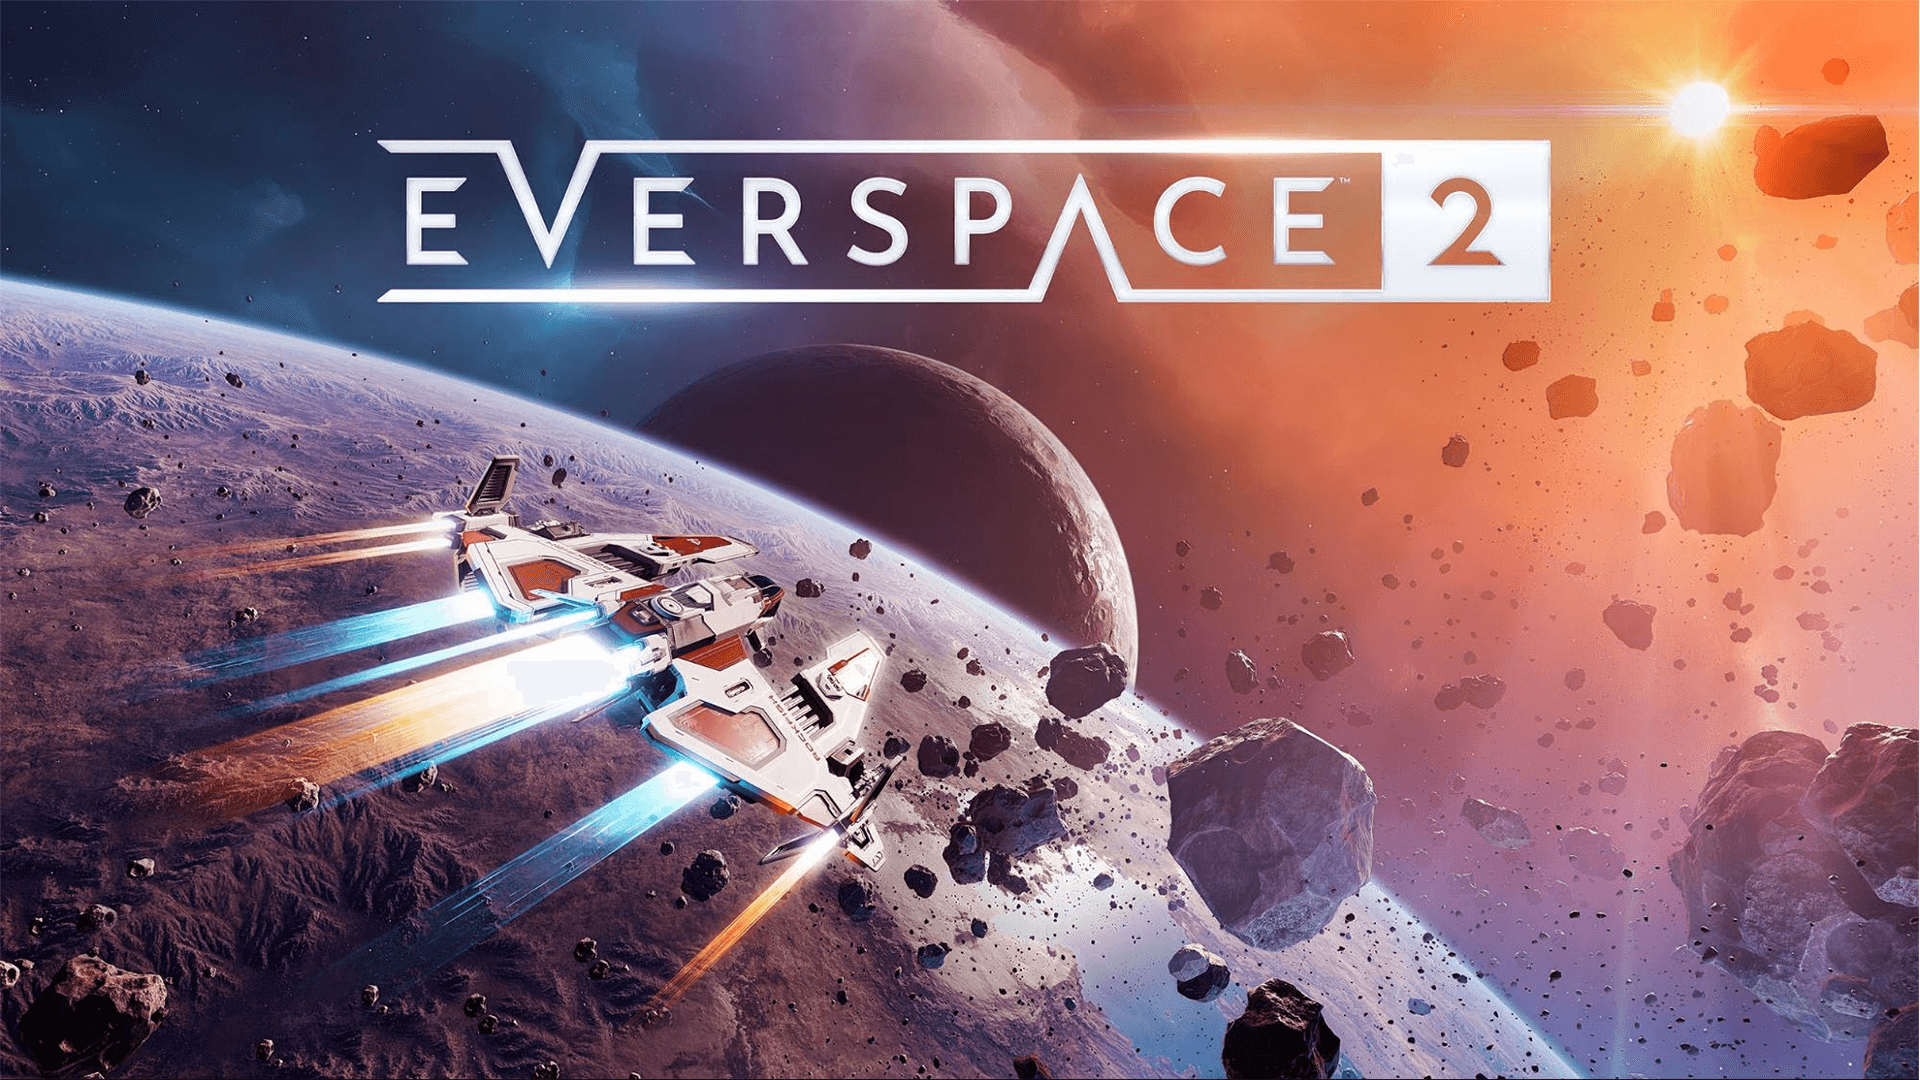 Everspace 2 Early Access: Now Available on Steam! - space shooter